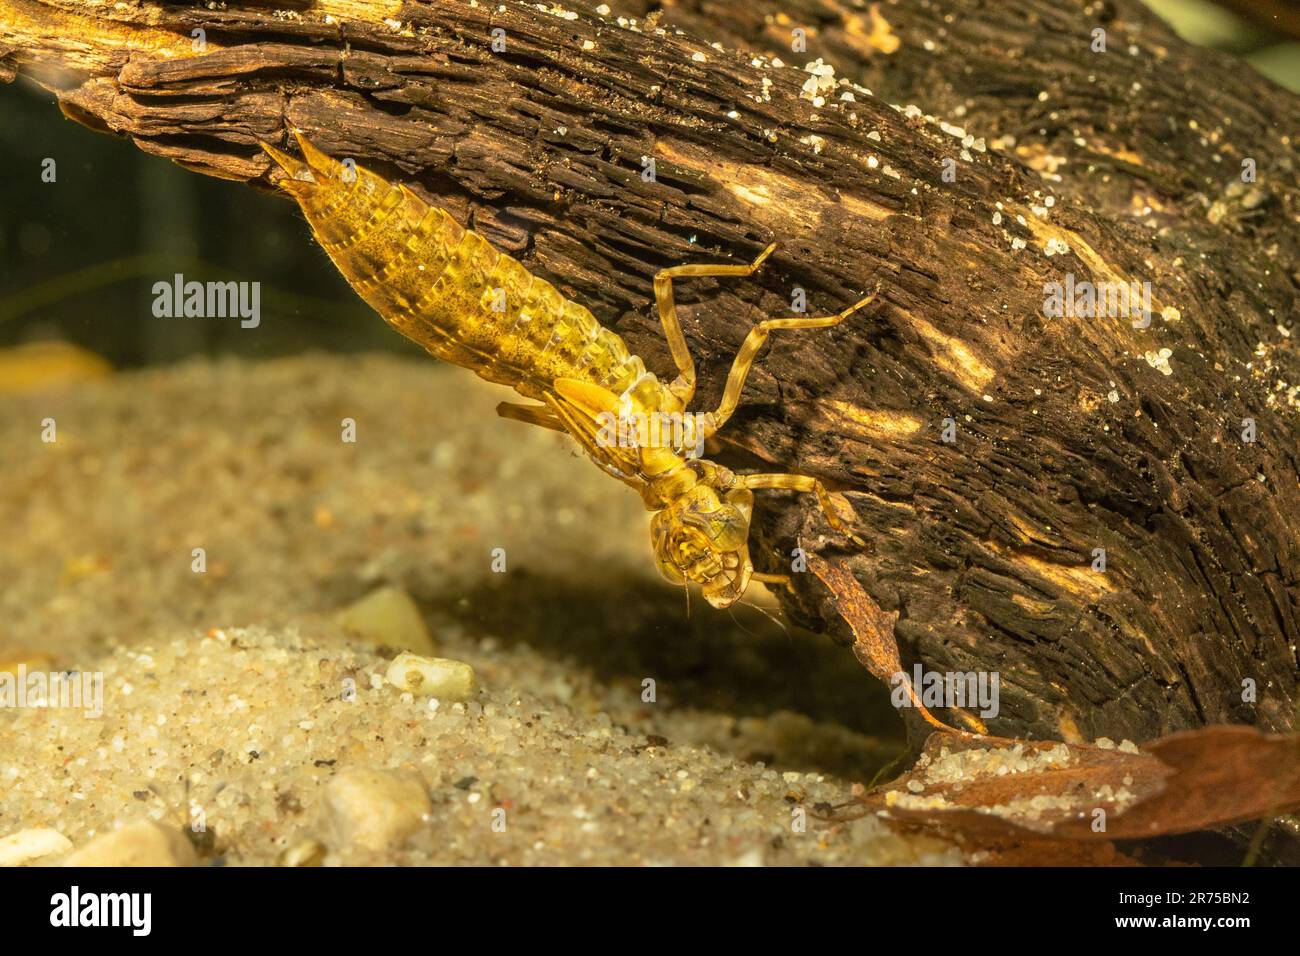 Hawker (Aeshna spec.), with prey under water, Germany Stock Photo